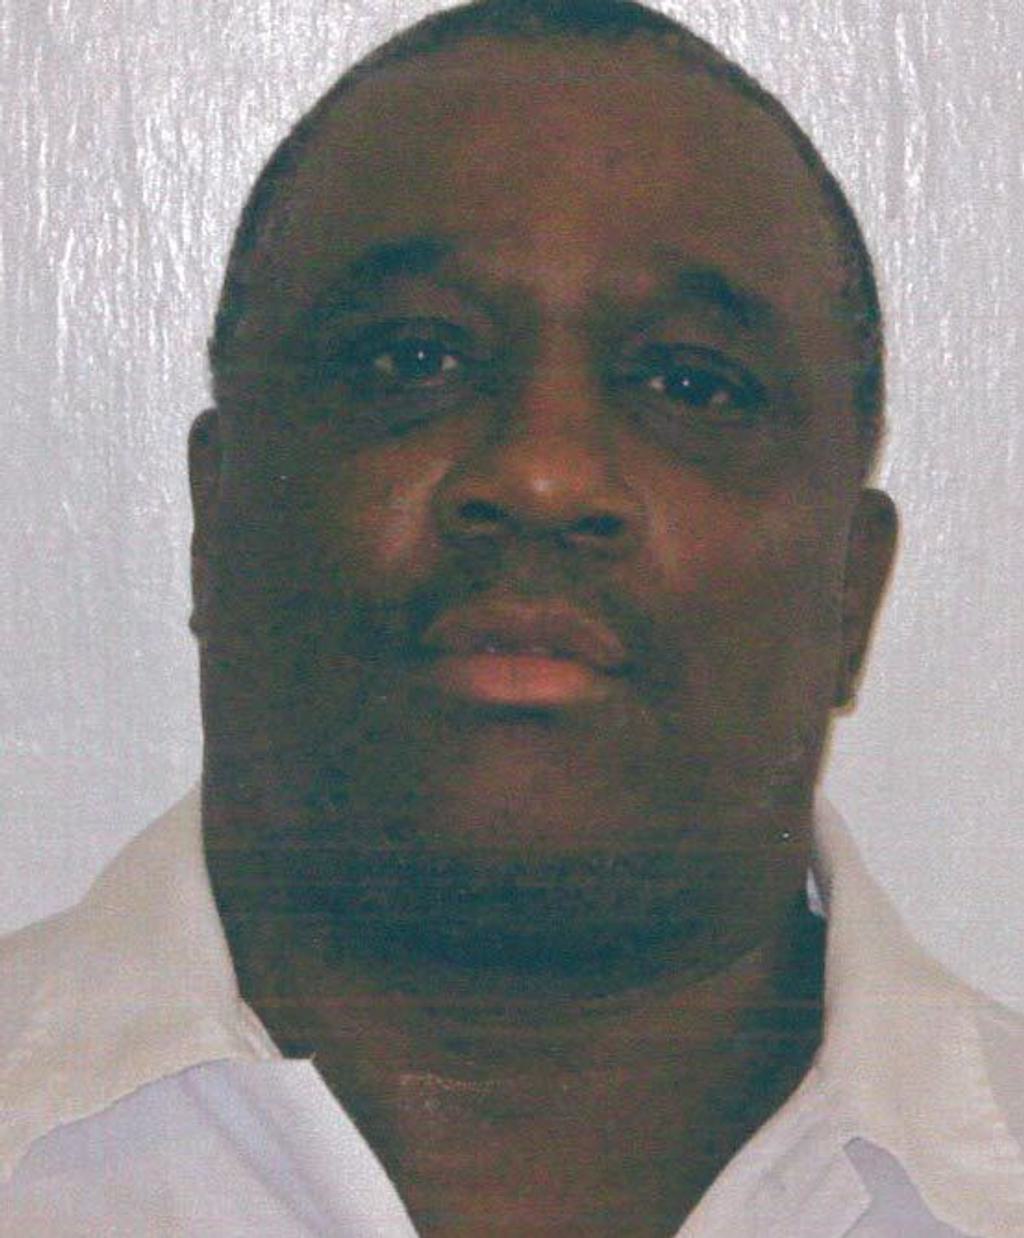 NEW PODCAST:  He May Be Innocent and Intellectually Disabled, But Rocky Myers Faces Execution in Alabama